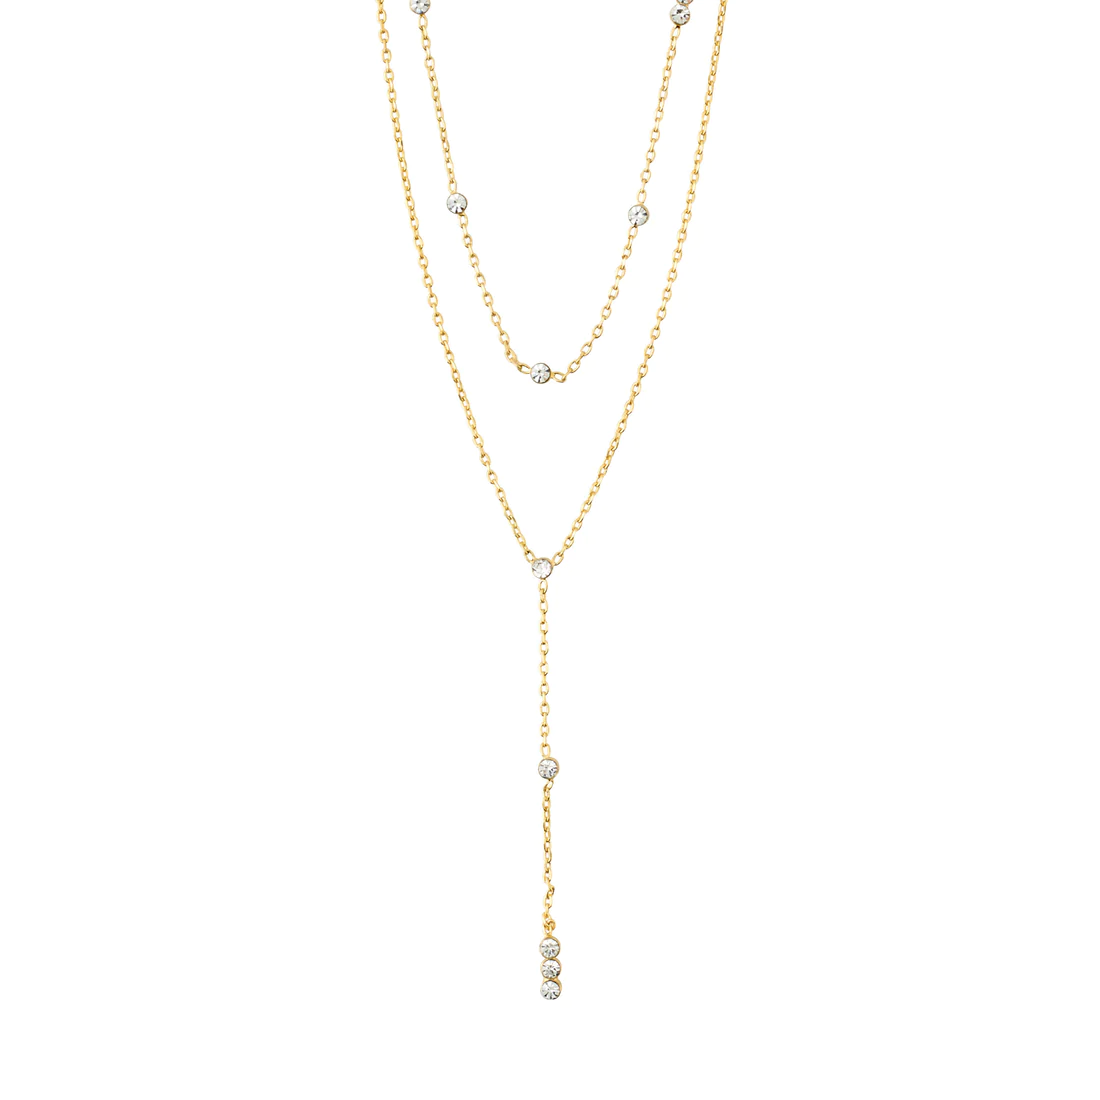 KAMARI recycled crystal chain necklace